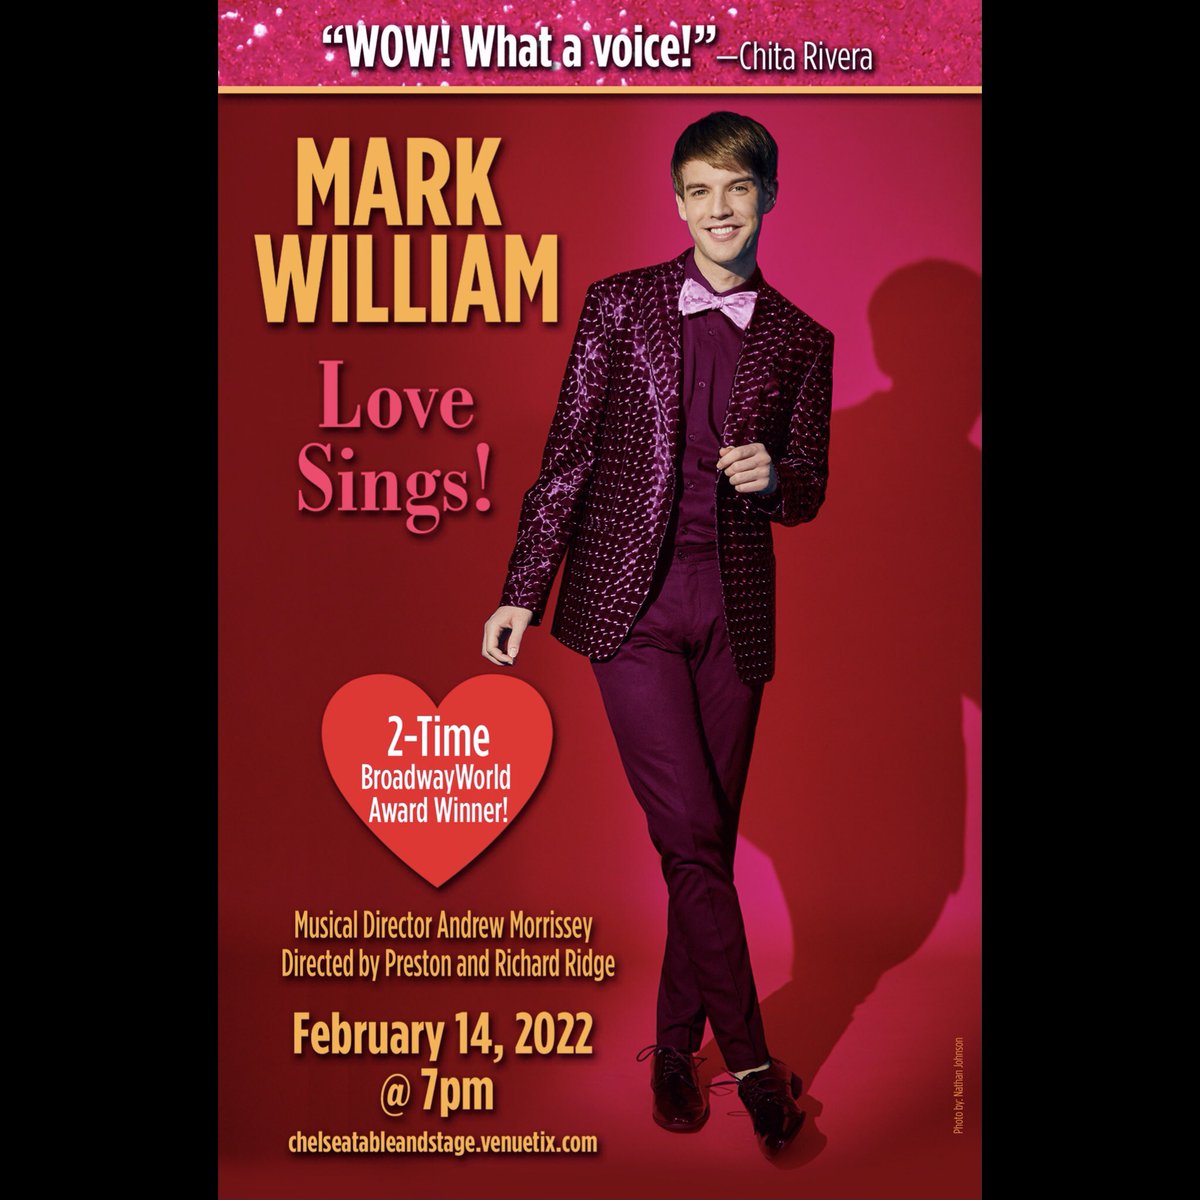 Join me on #ValentinesDay for Mark William: Love Sings! at the new #ChelseaTableAndStage! It’ll be romantic & full of joy! The perfect way to spend your V-Day. Be my date!

chelseatableandstage.venuetix.com/show/details/B…

#MarkWilliam #MarkWilliamNYC #LoveSings @RichardRidge  #PrestonRidgeManagement